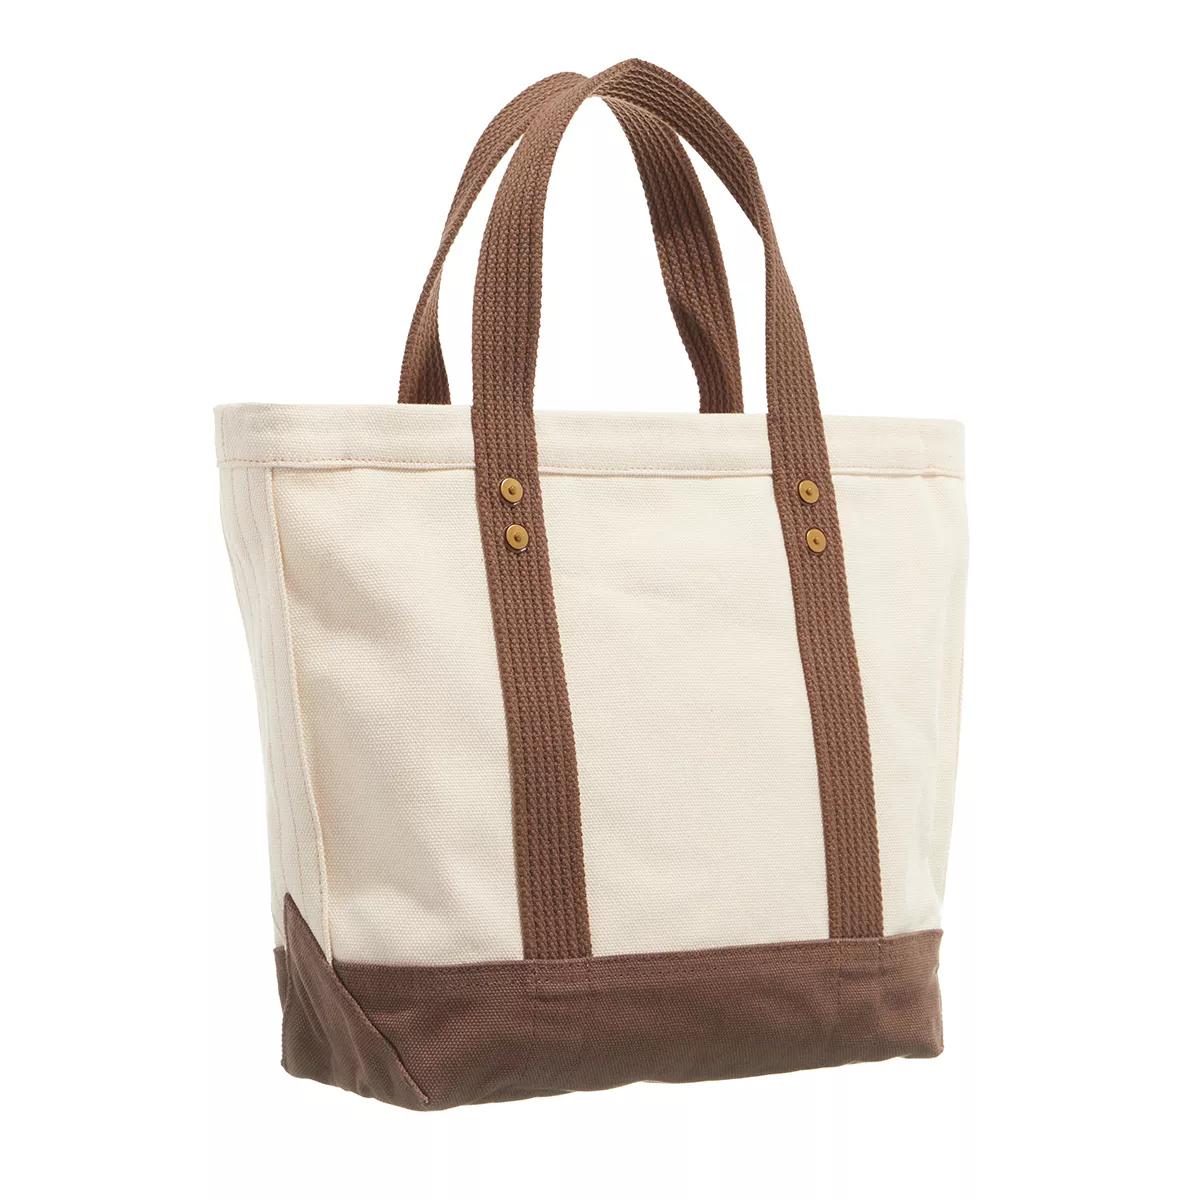 Polo Ralph Lauren Totes Pp Tote Small in beige